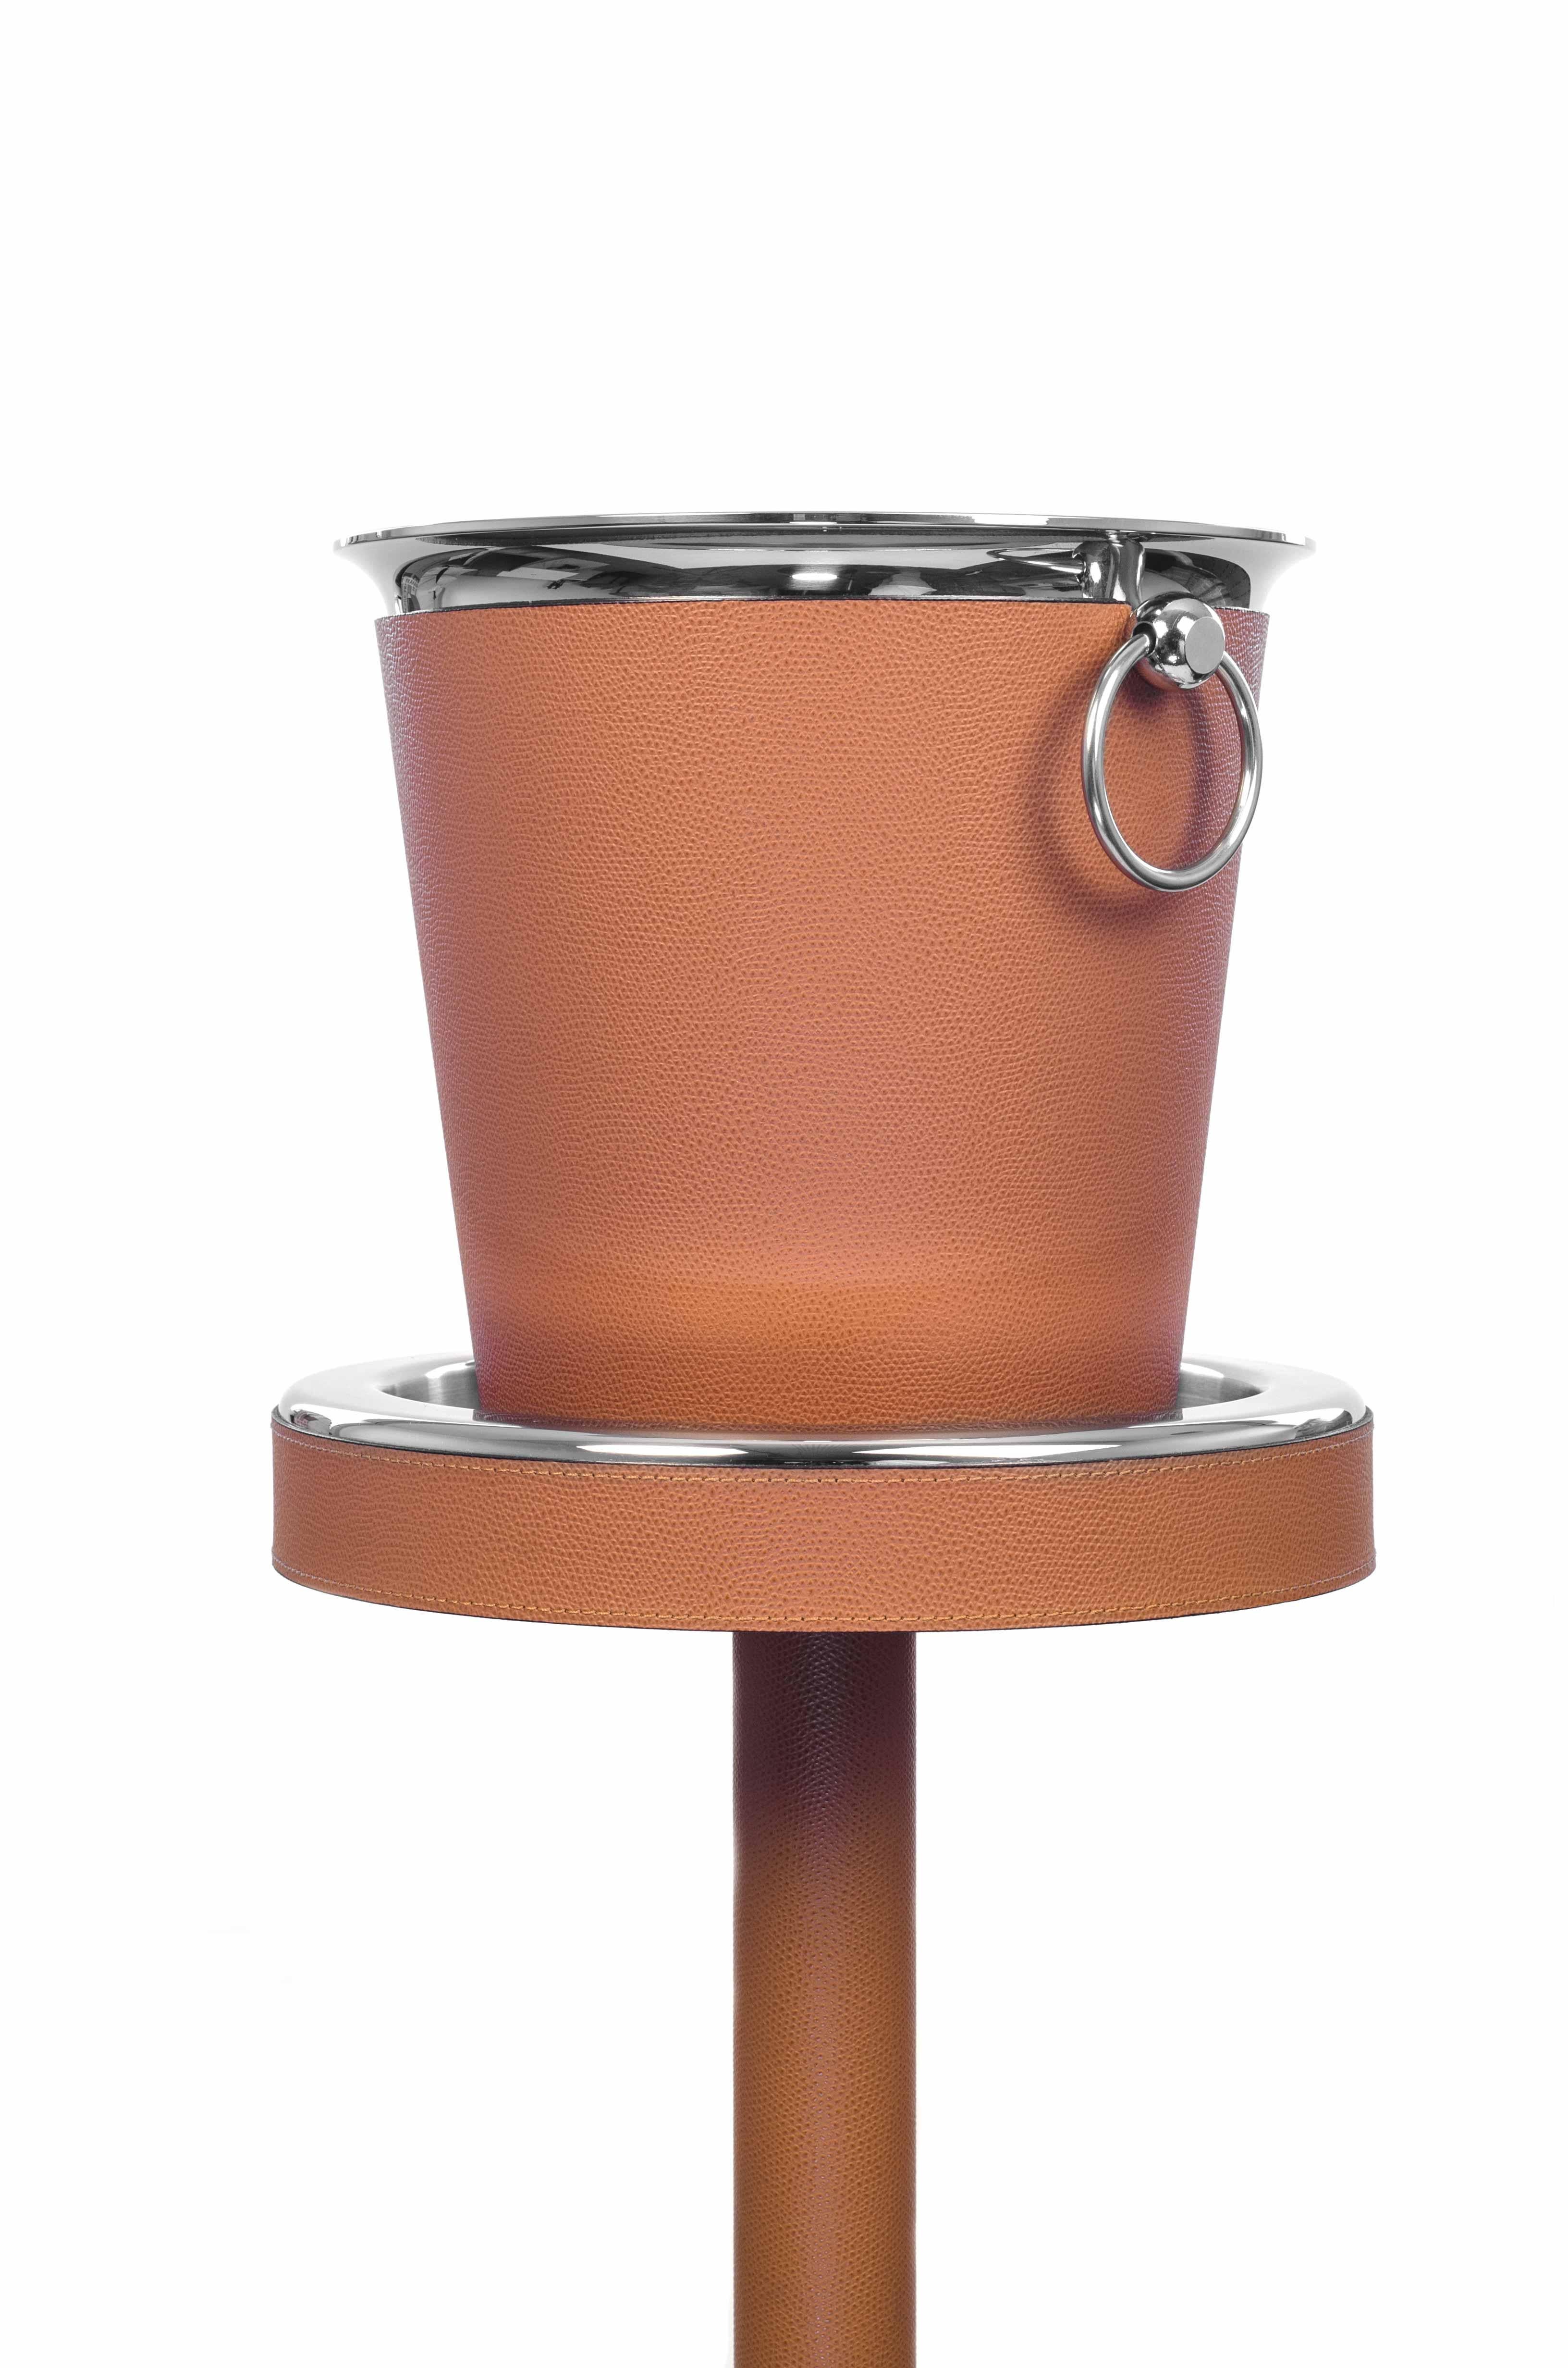 Modern 21st Century Steel Ice Bucket Stand with Leather Cover Handmade in Italy For Sale